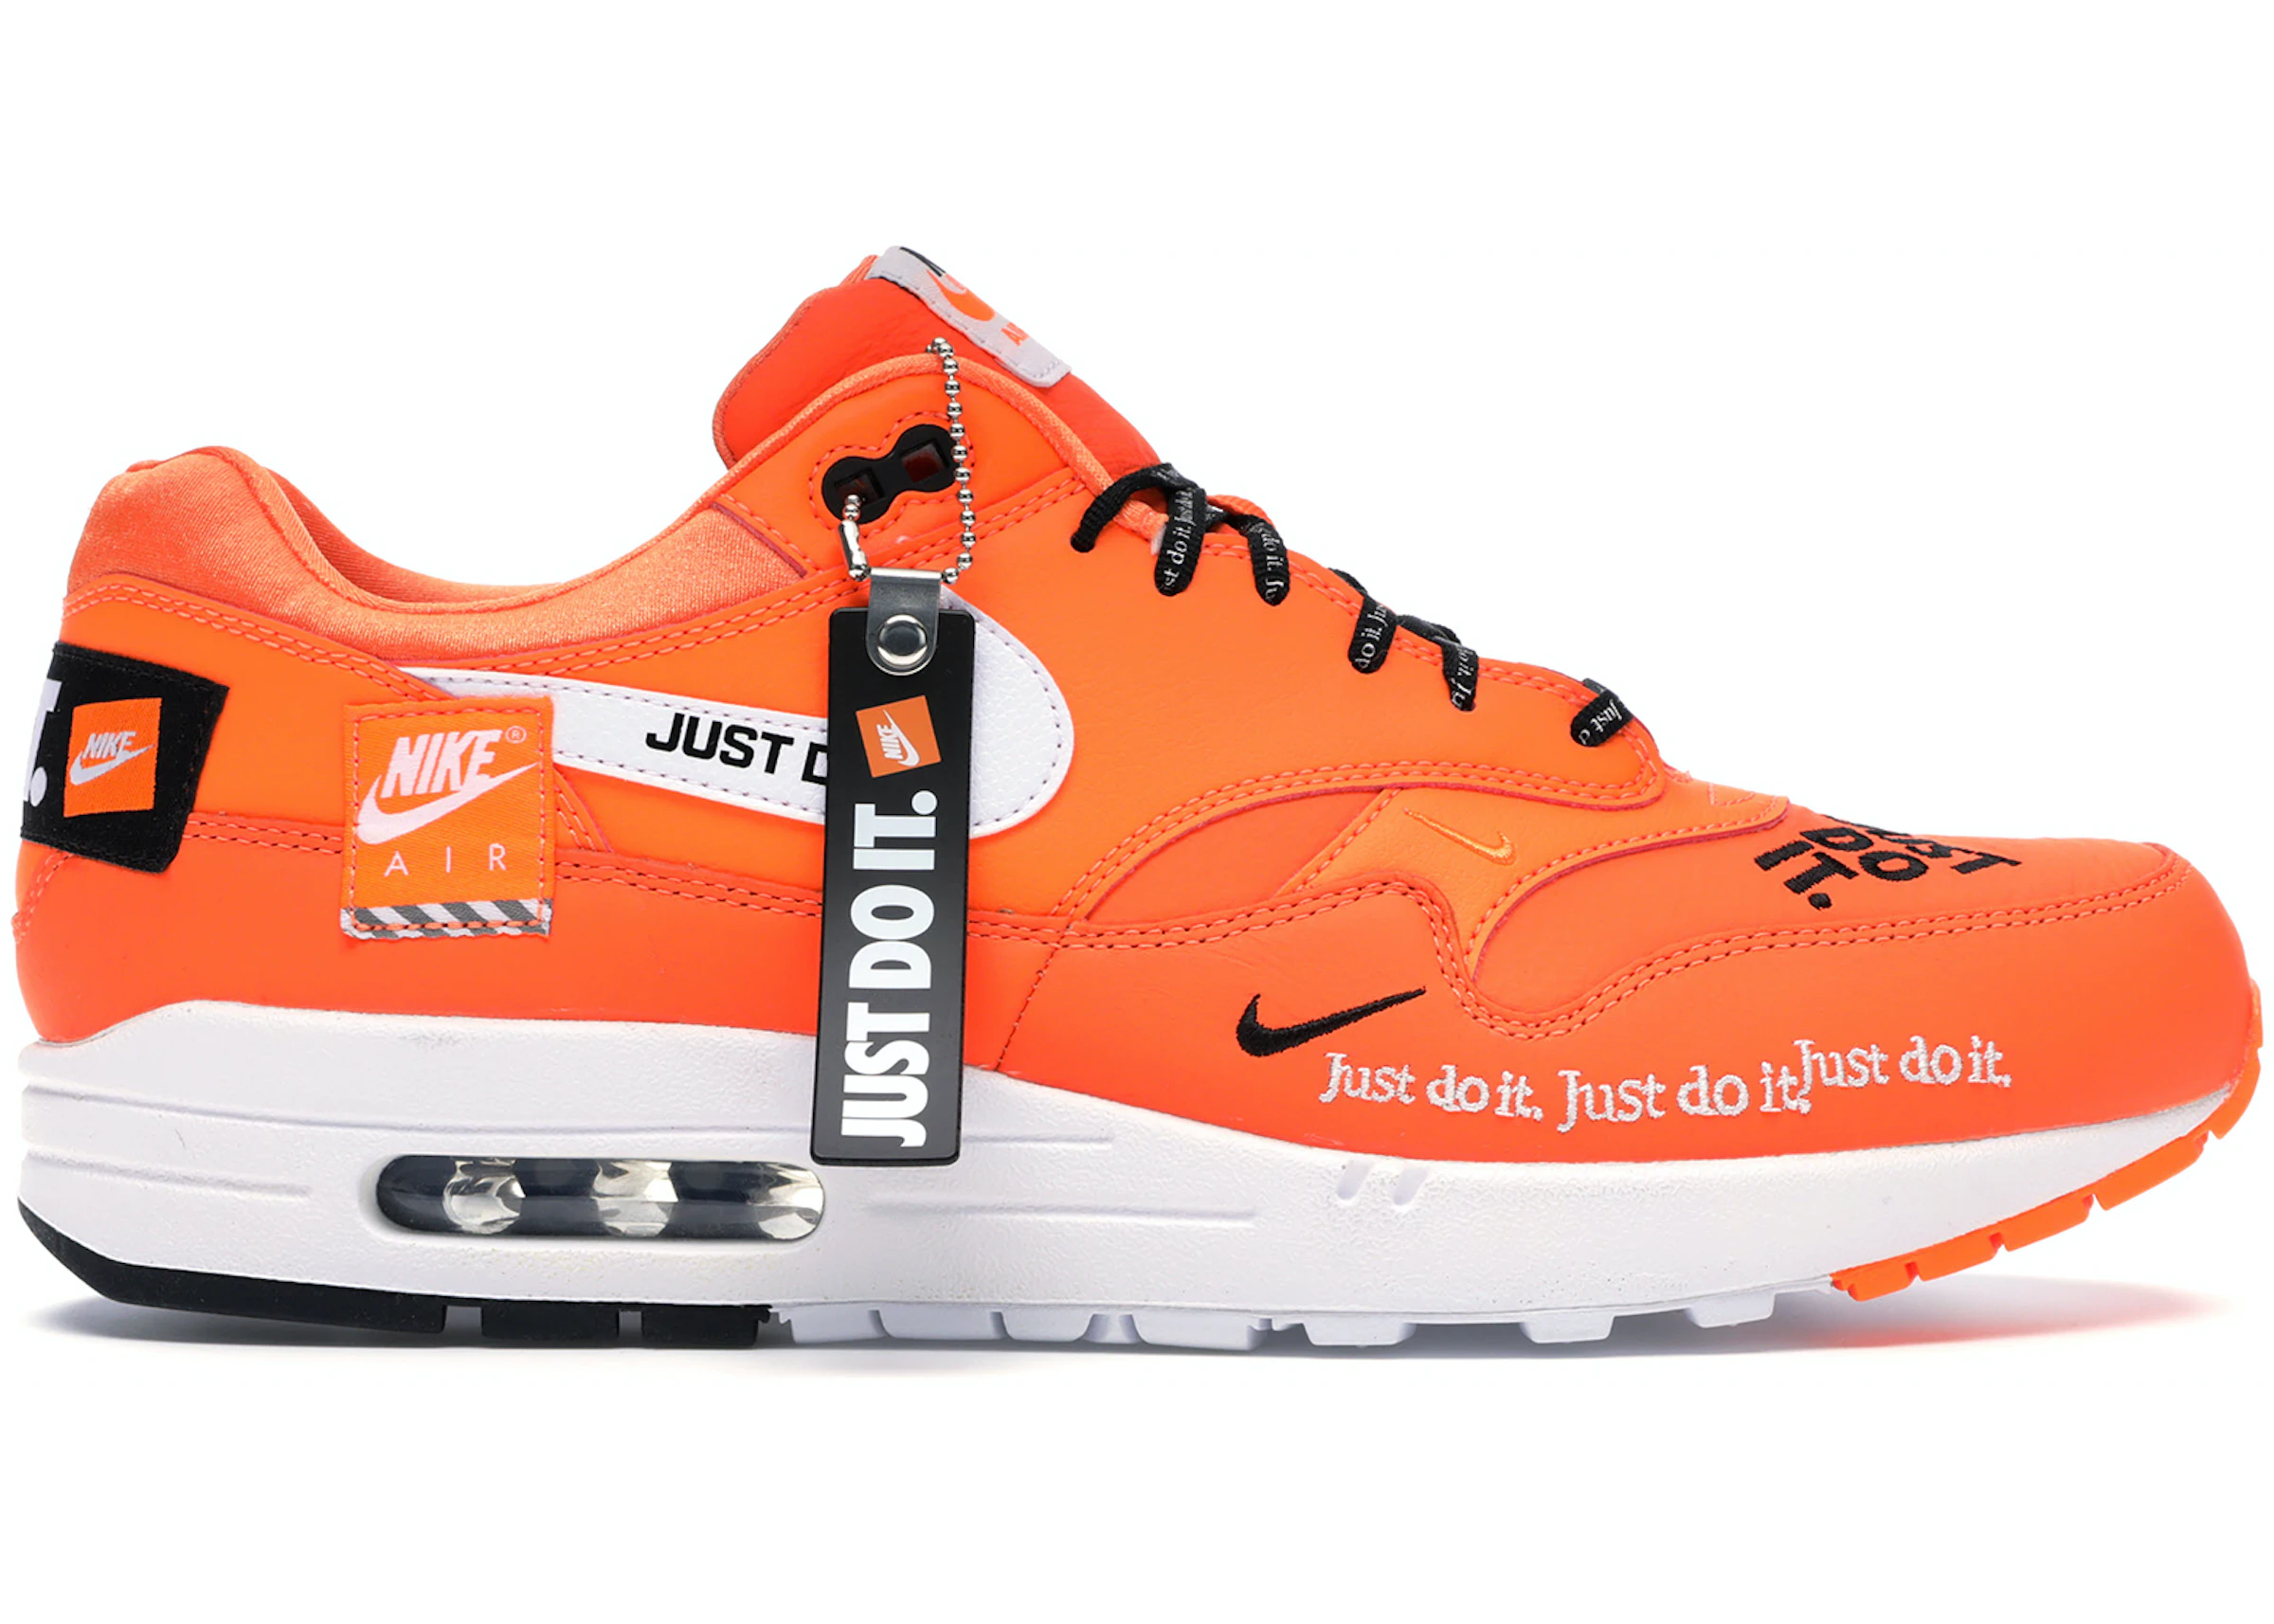 Hick Commandant grens Nike Air Max 1 Just Do It Pack Orange - AO1021-800 - US